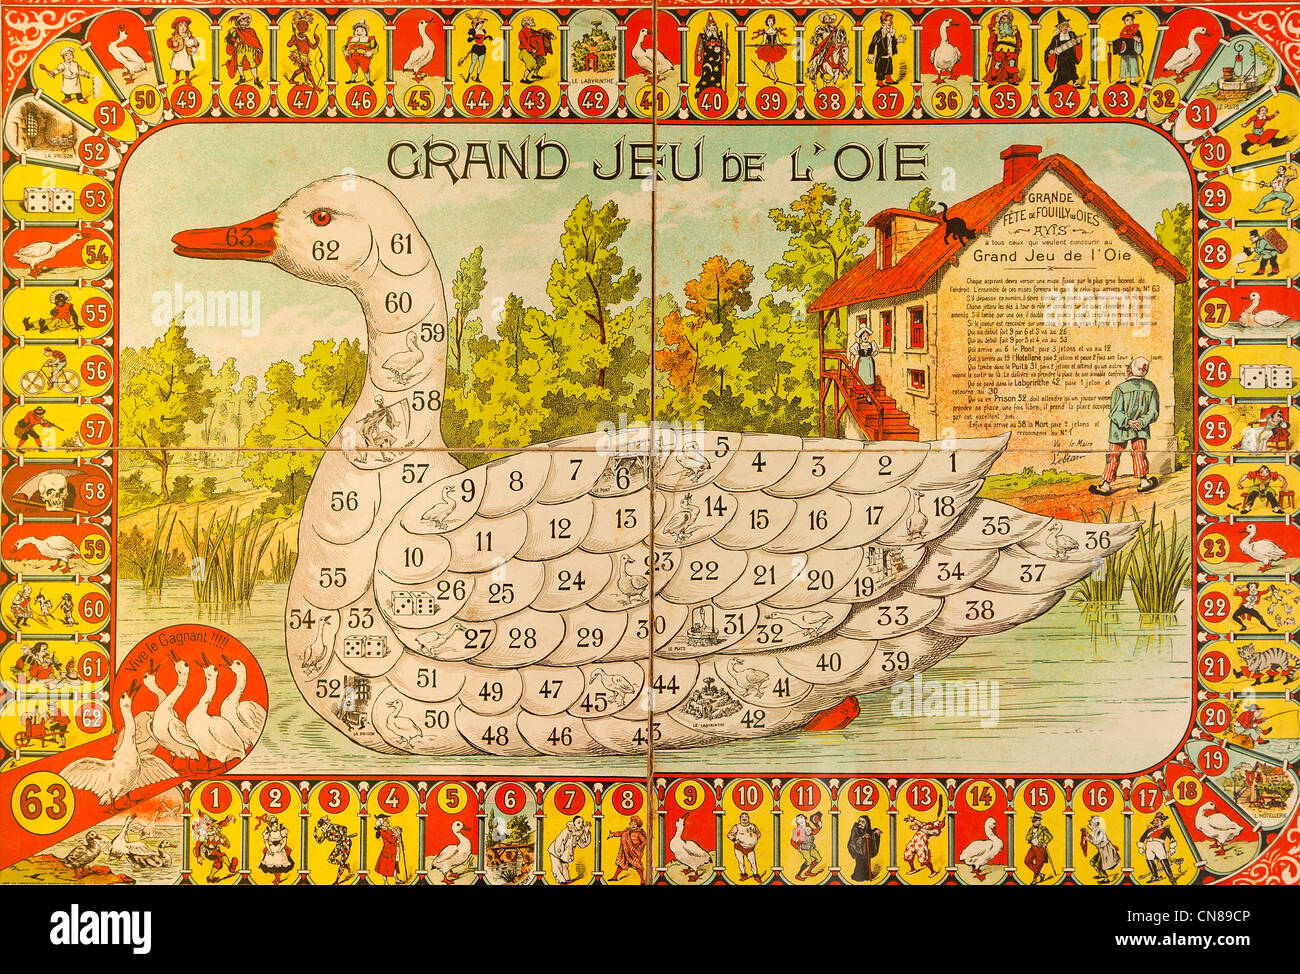 France, Yvelines, Rambouillet, Musee du Jeu de l'oie (Game of the Goose Museum) Stock Photo